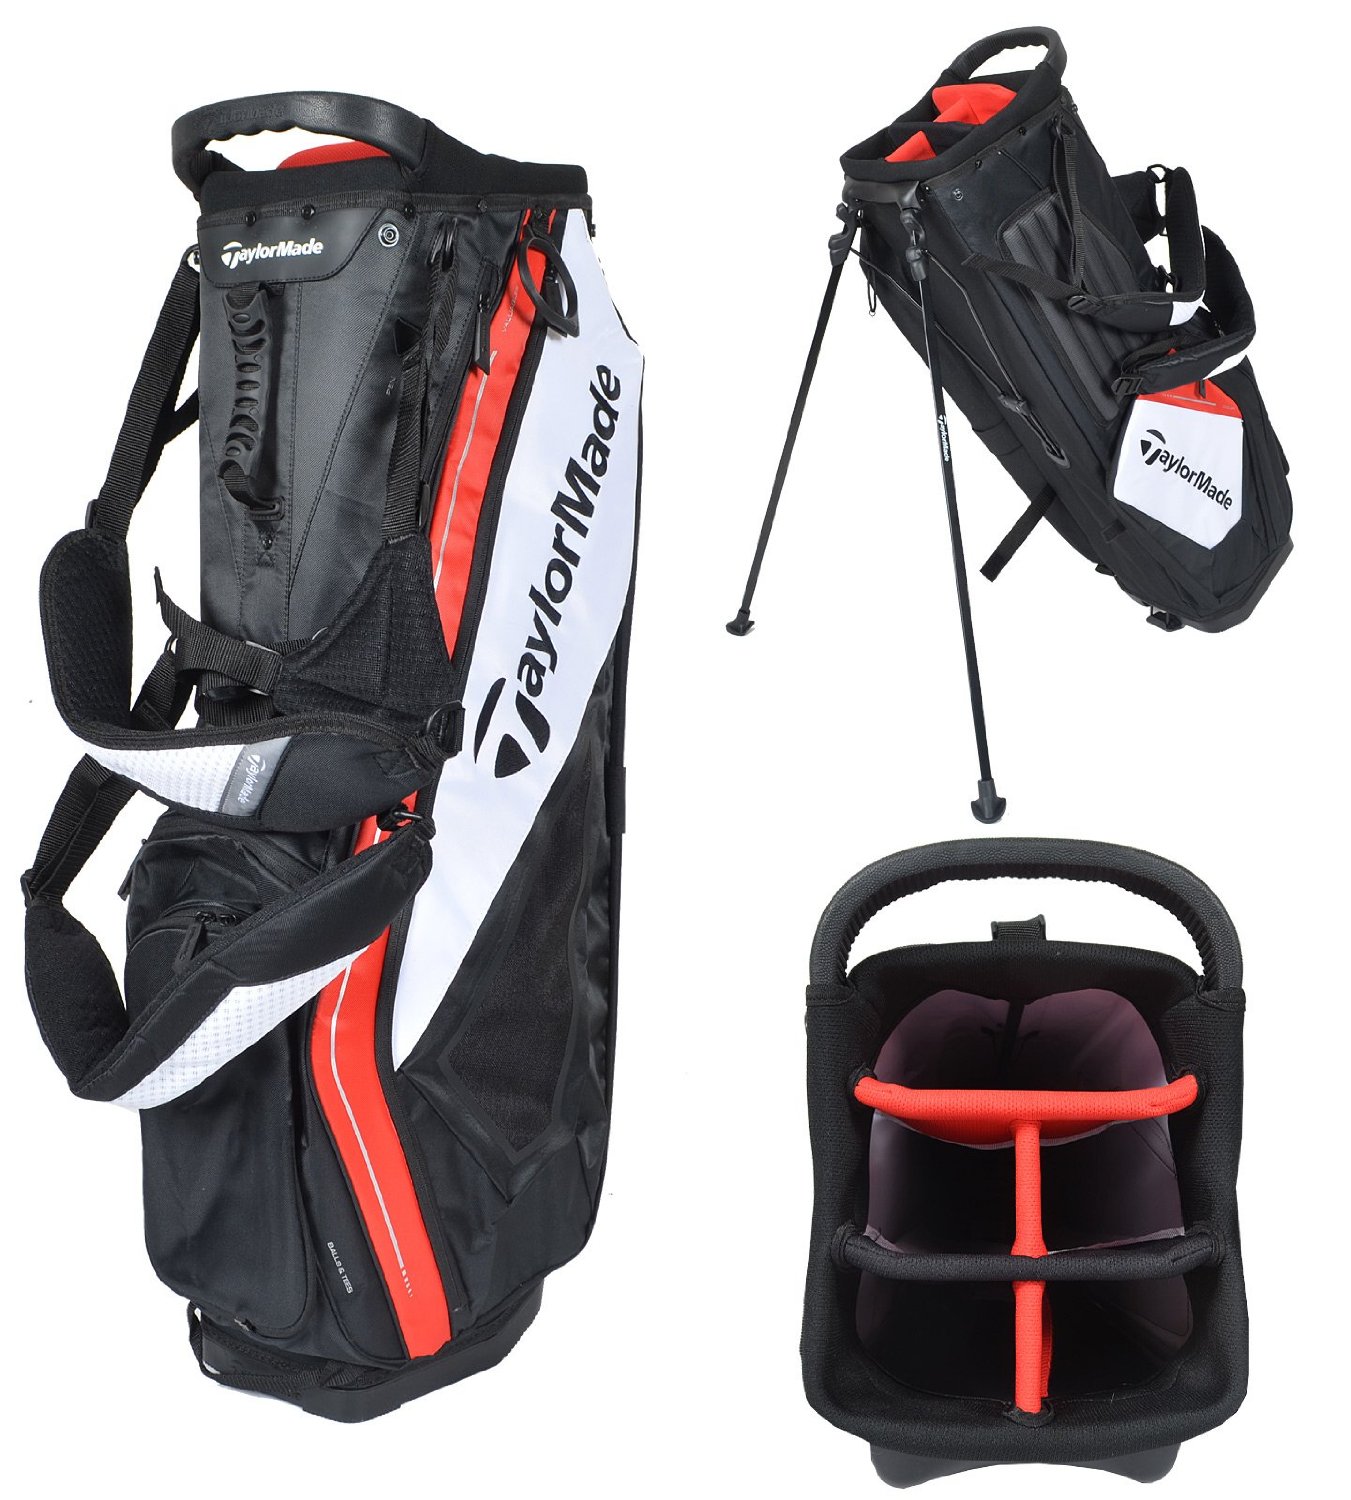 Taylormade Purelite Golf Stand Bags